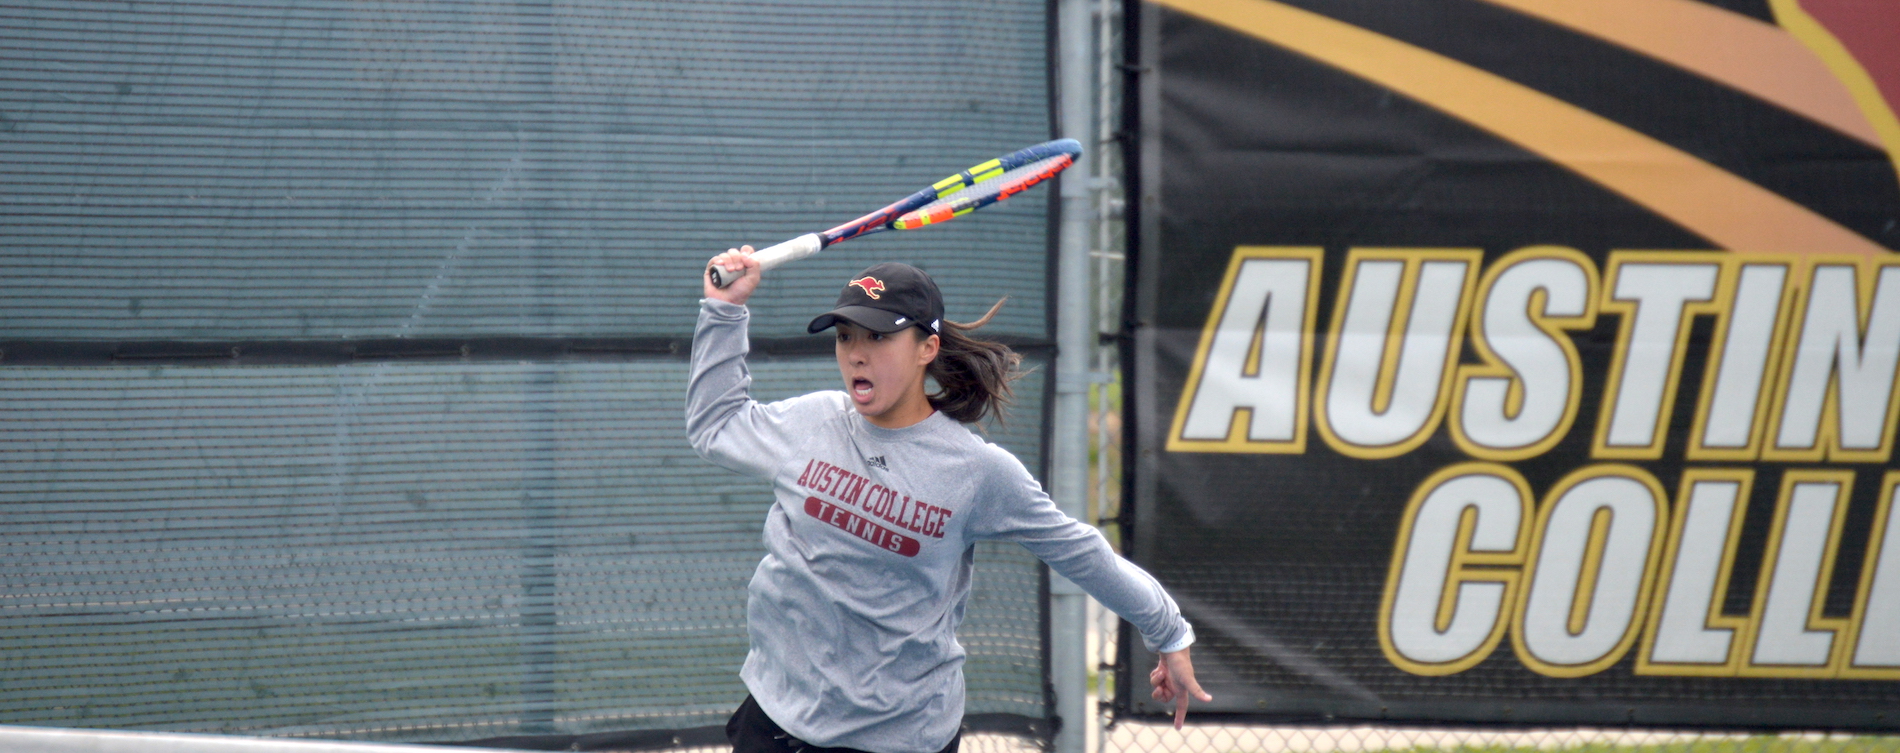 Duong Earns National and Regional Bests in ITA Fall Singles Rankings